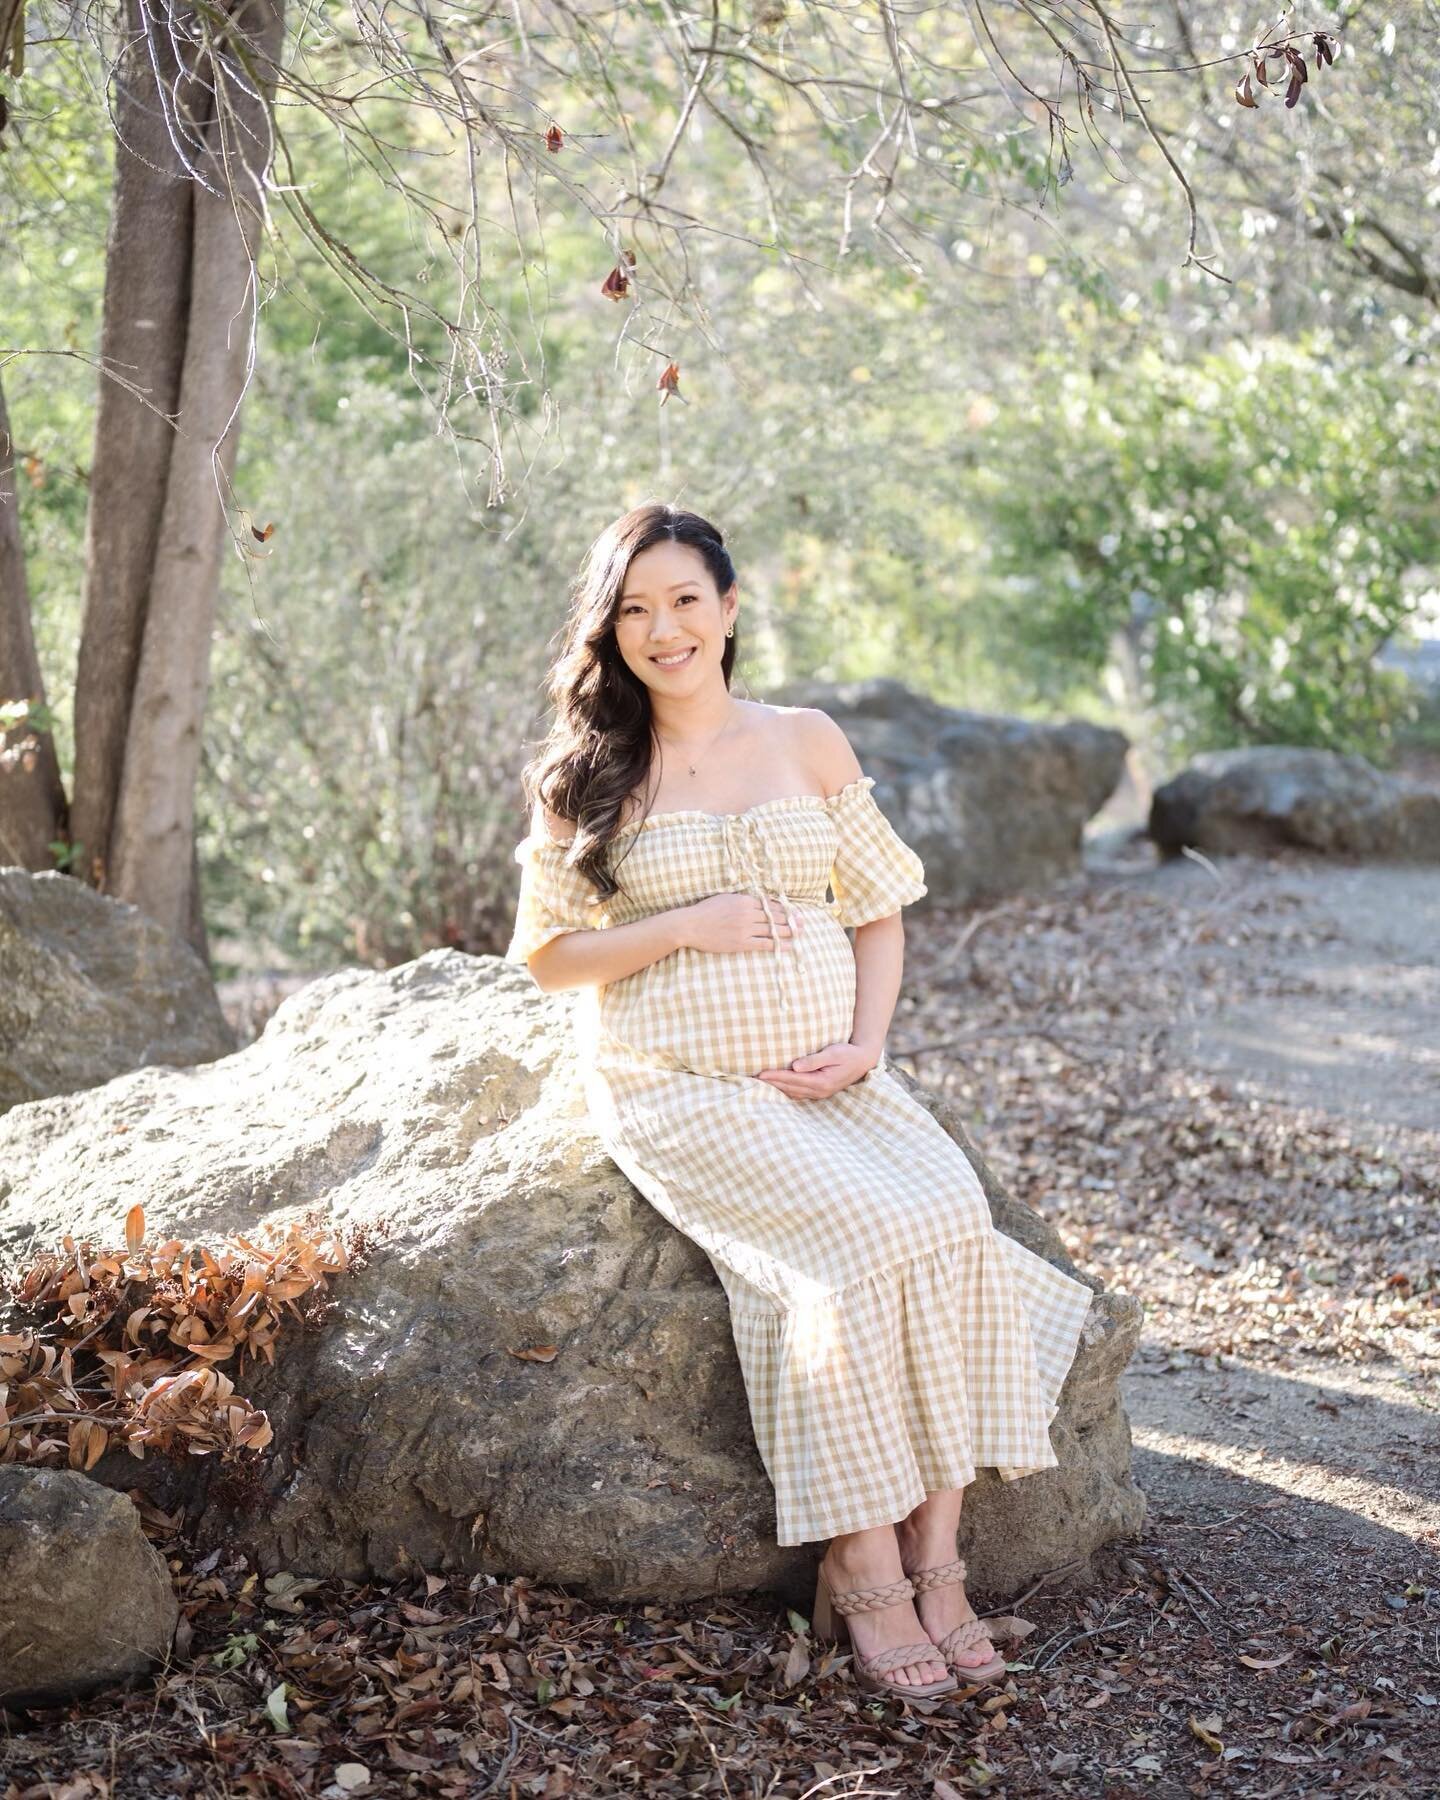 Back in work mode and got to beautify @katejlee for her maternity shoot. Thank you for trusting me in. Hair &amp; Makeup @juliejungmakeup ❤️ #maternityshoot #2022